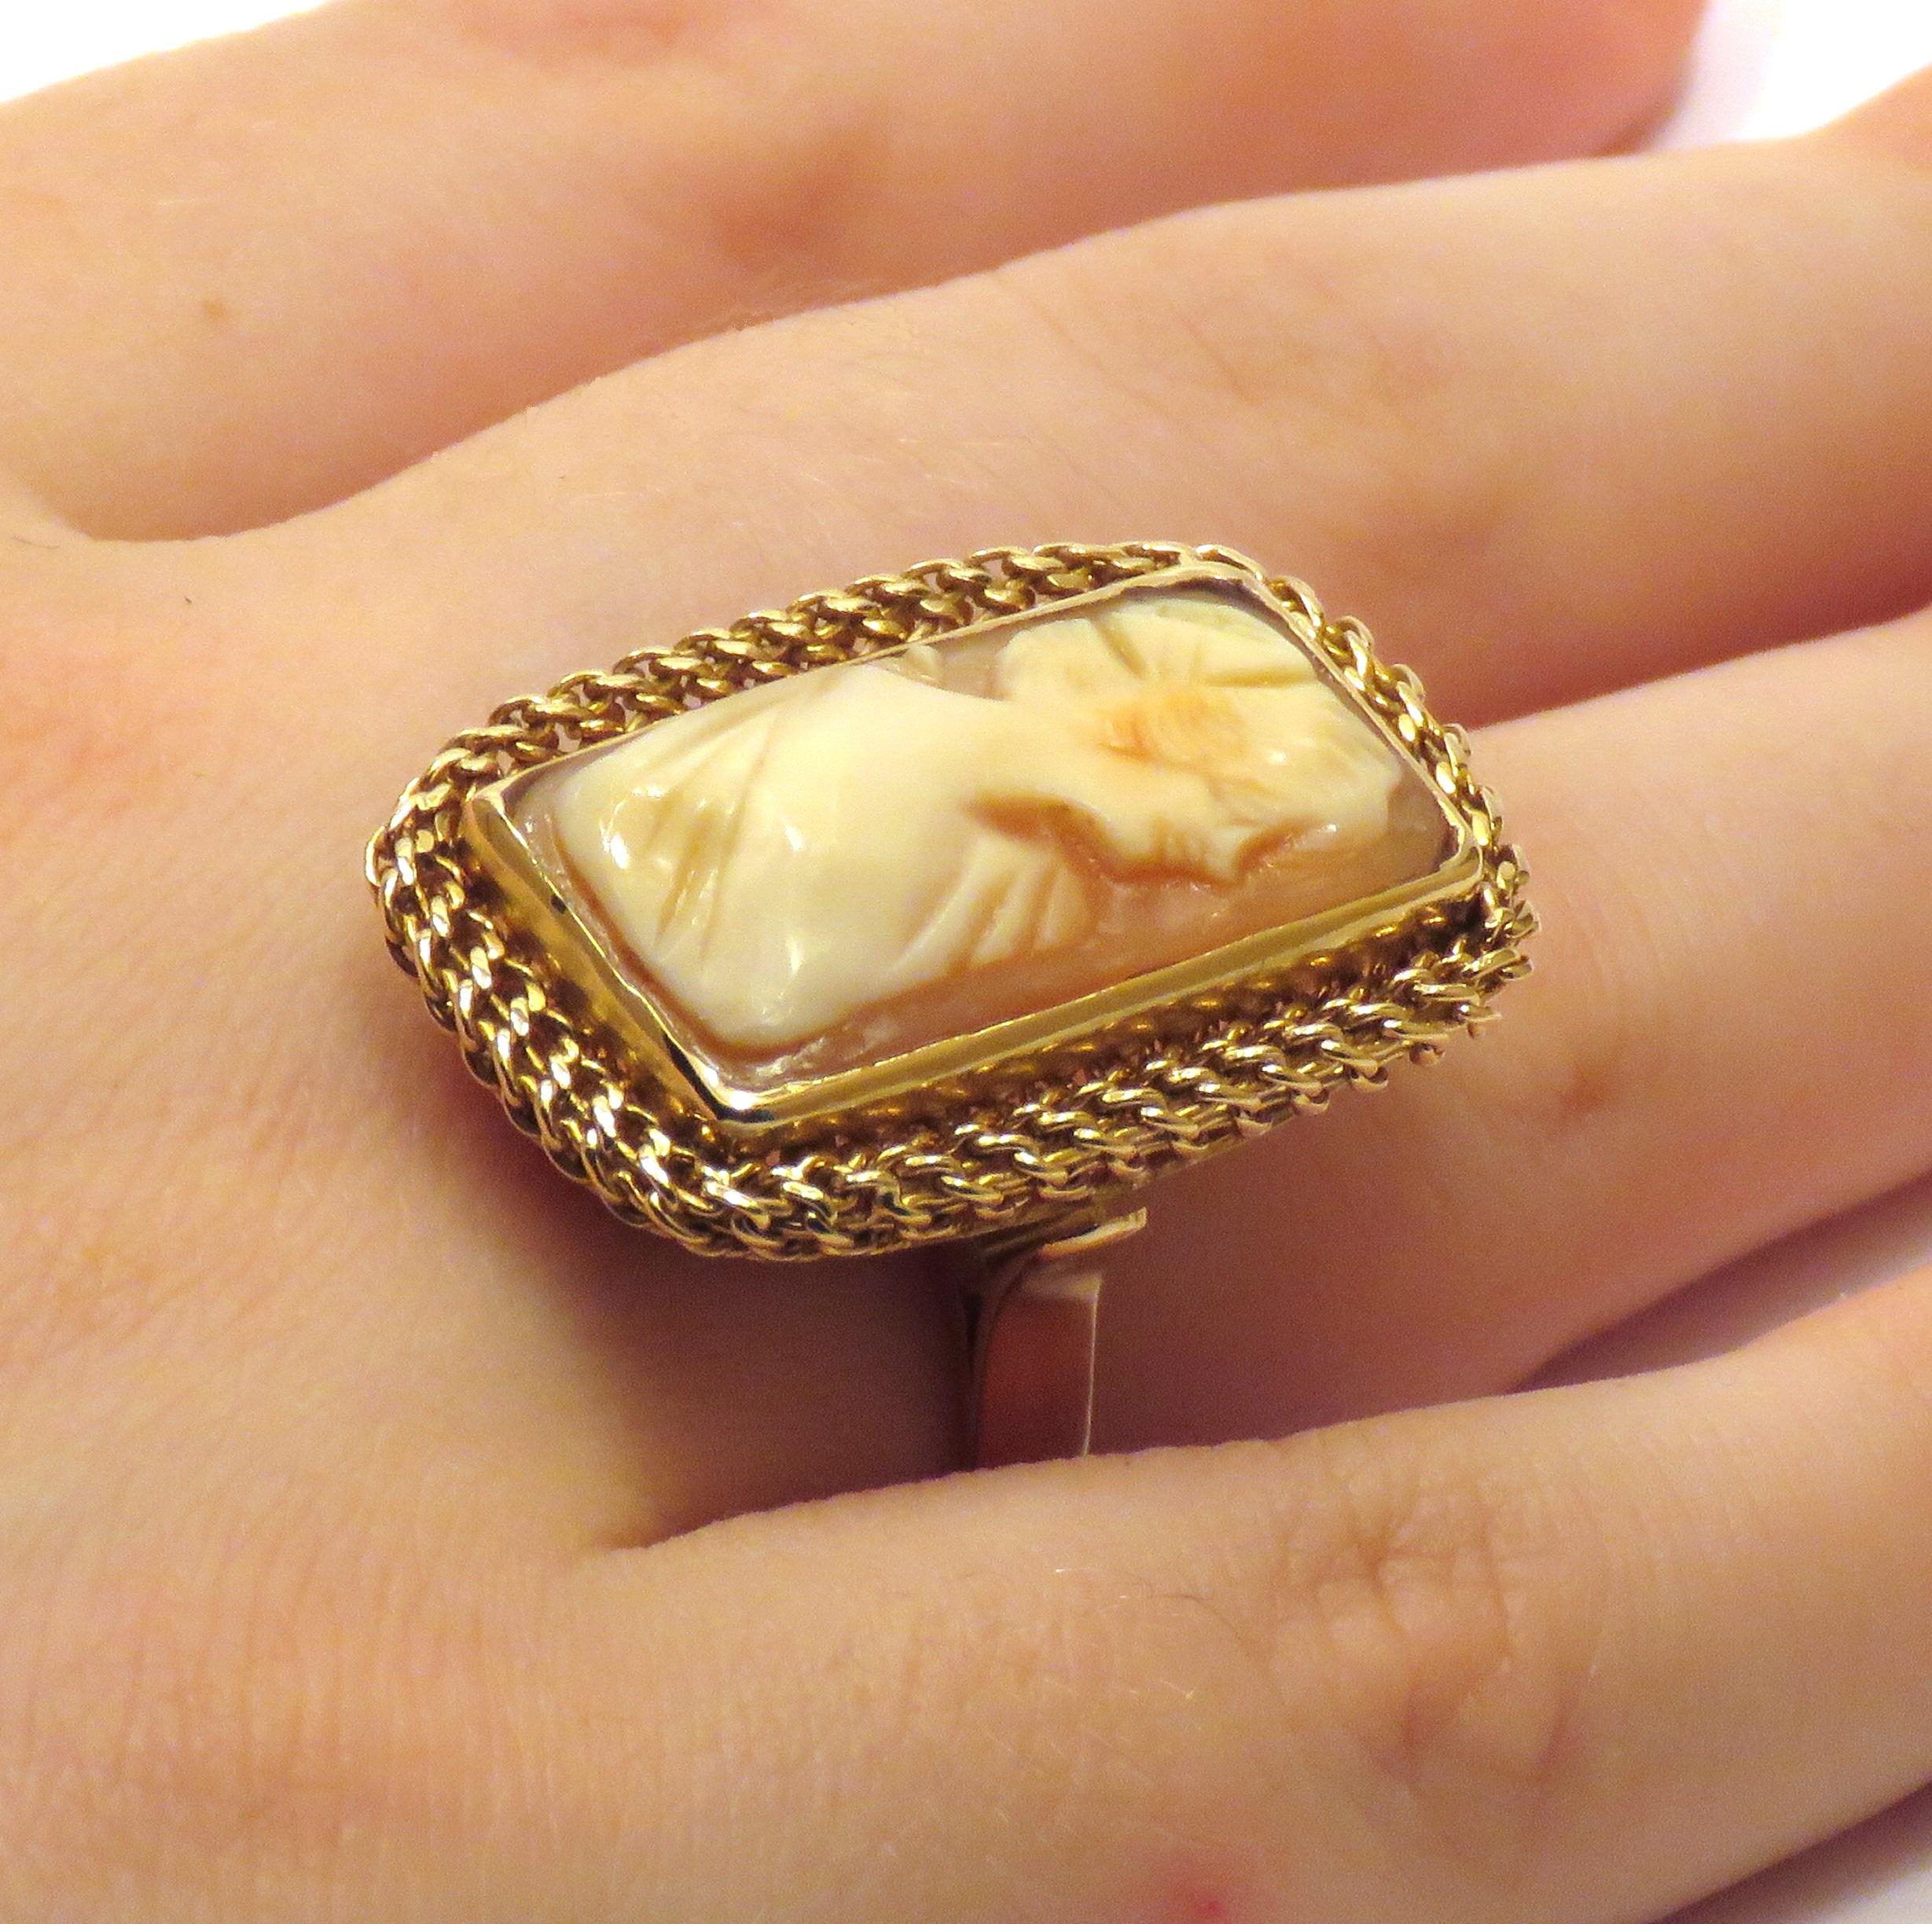 1970s yellow gold 18 karat ring with shell cameo.
Cameo size: 22 x 12  millimeters / 0.866 x 0.472 inches.
Ring size: Us 6, Italian 12, French 52, it can be resized before